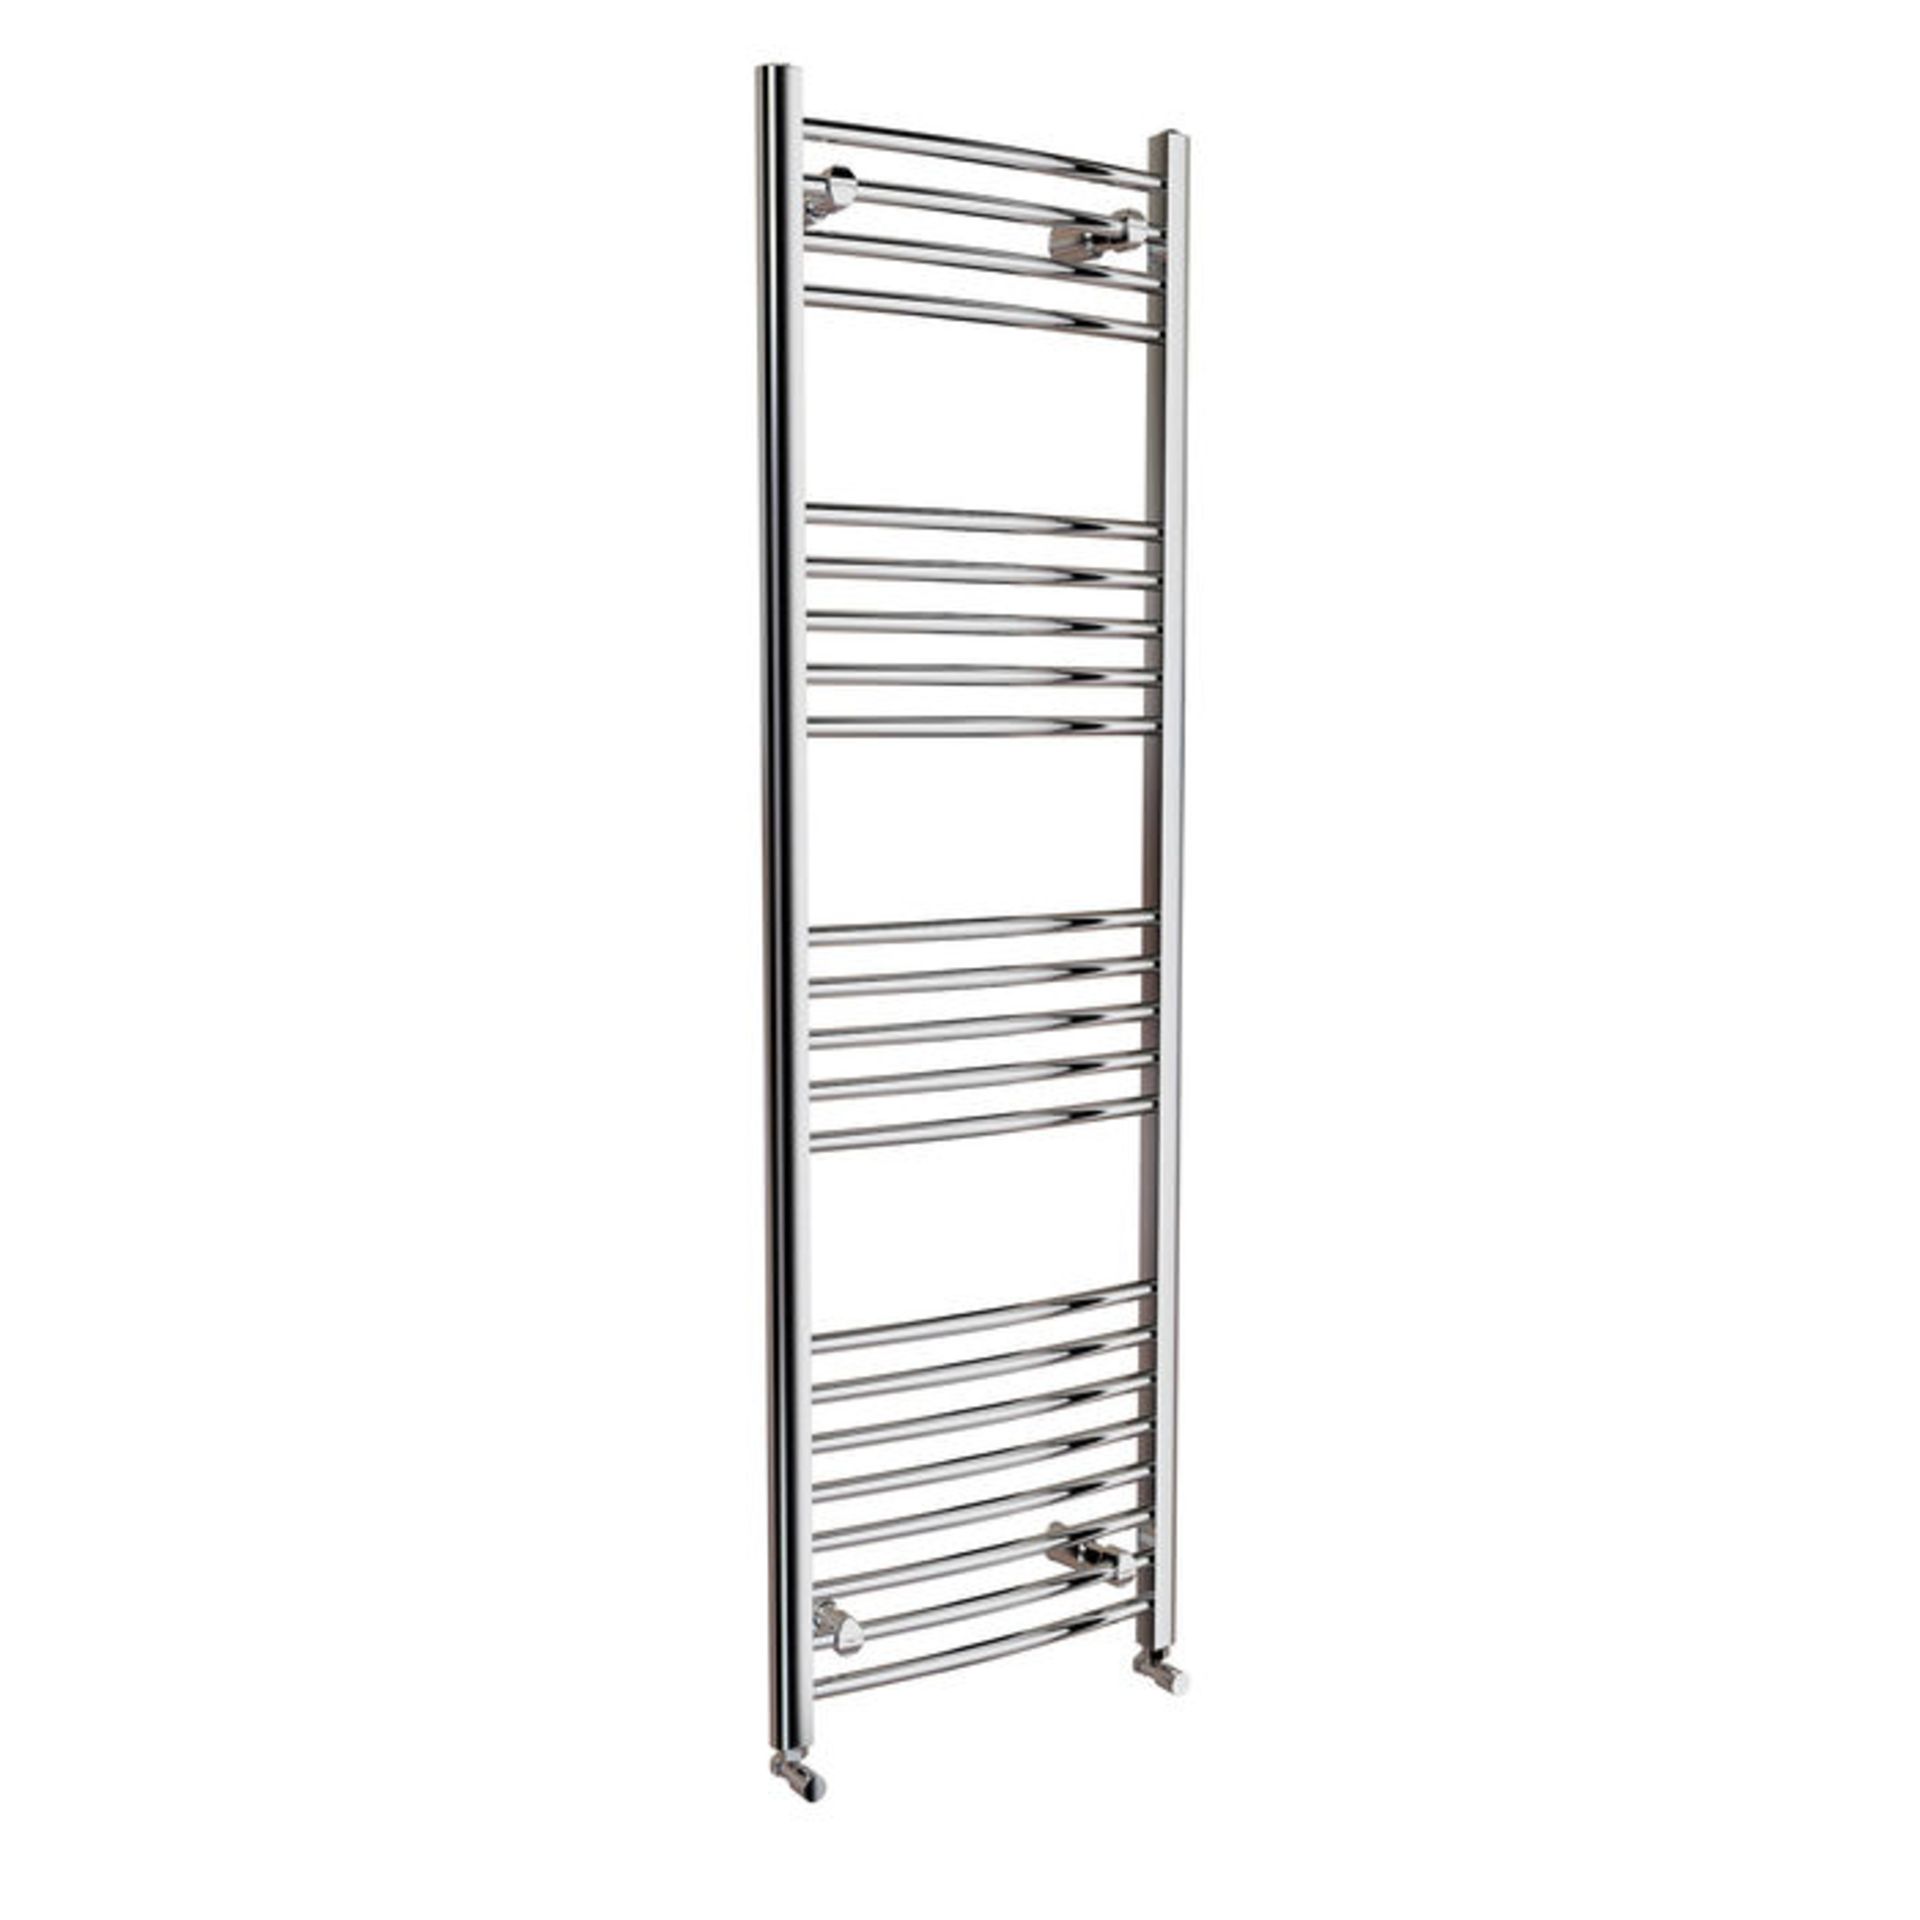 (JM49) 1600x500mm - 20mm Tubes - Chrome Curved Rail Ladder Towel Radiator. Made from chrome plated - Image 3 of 3